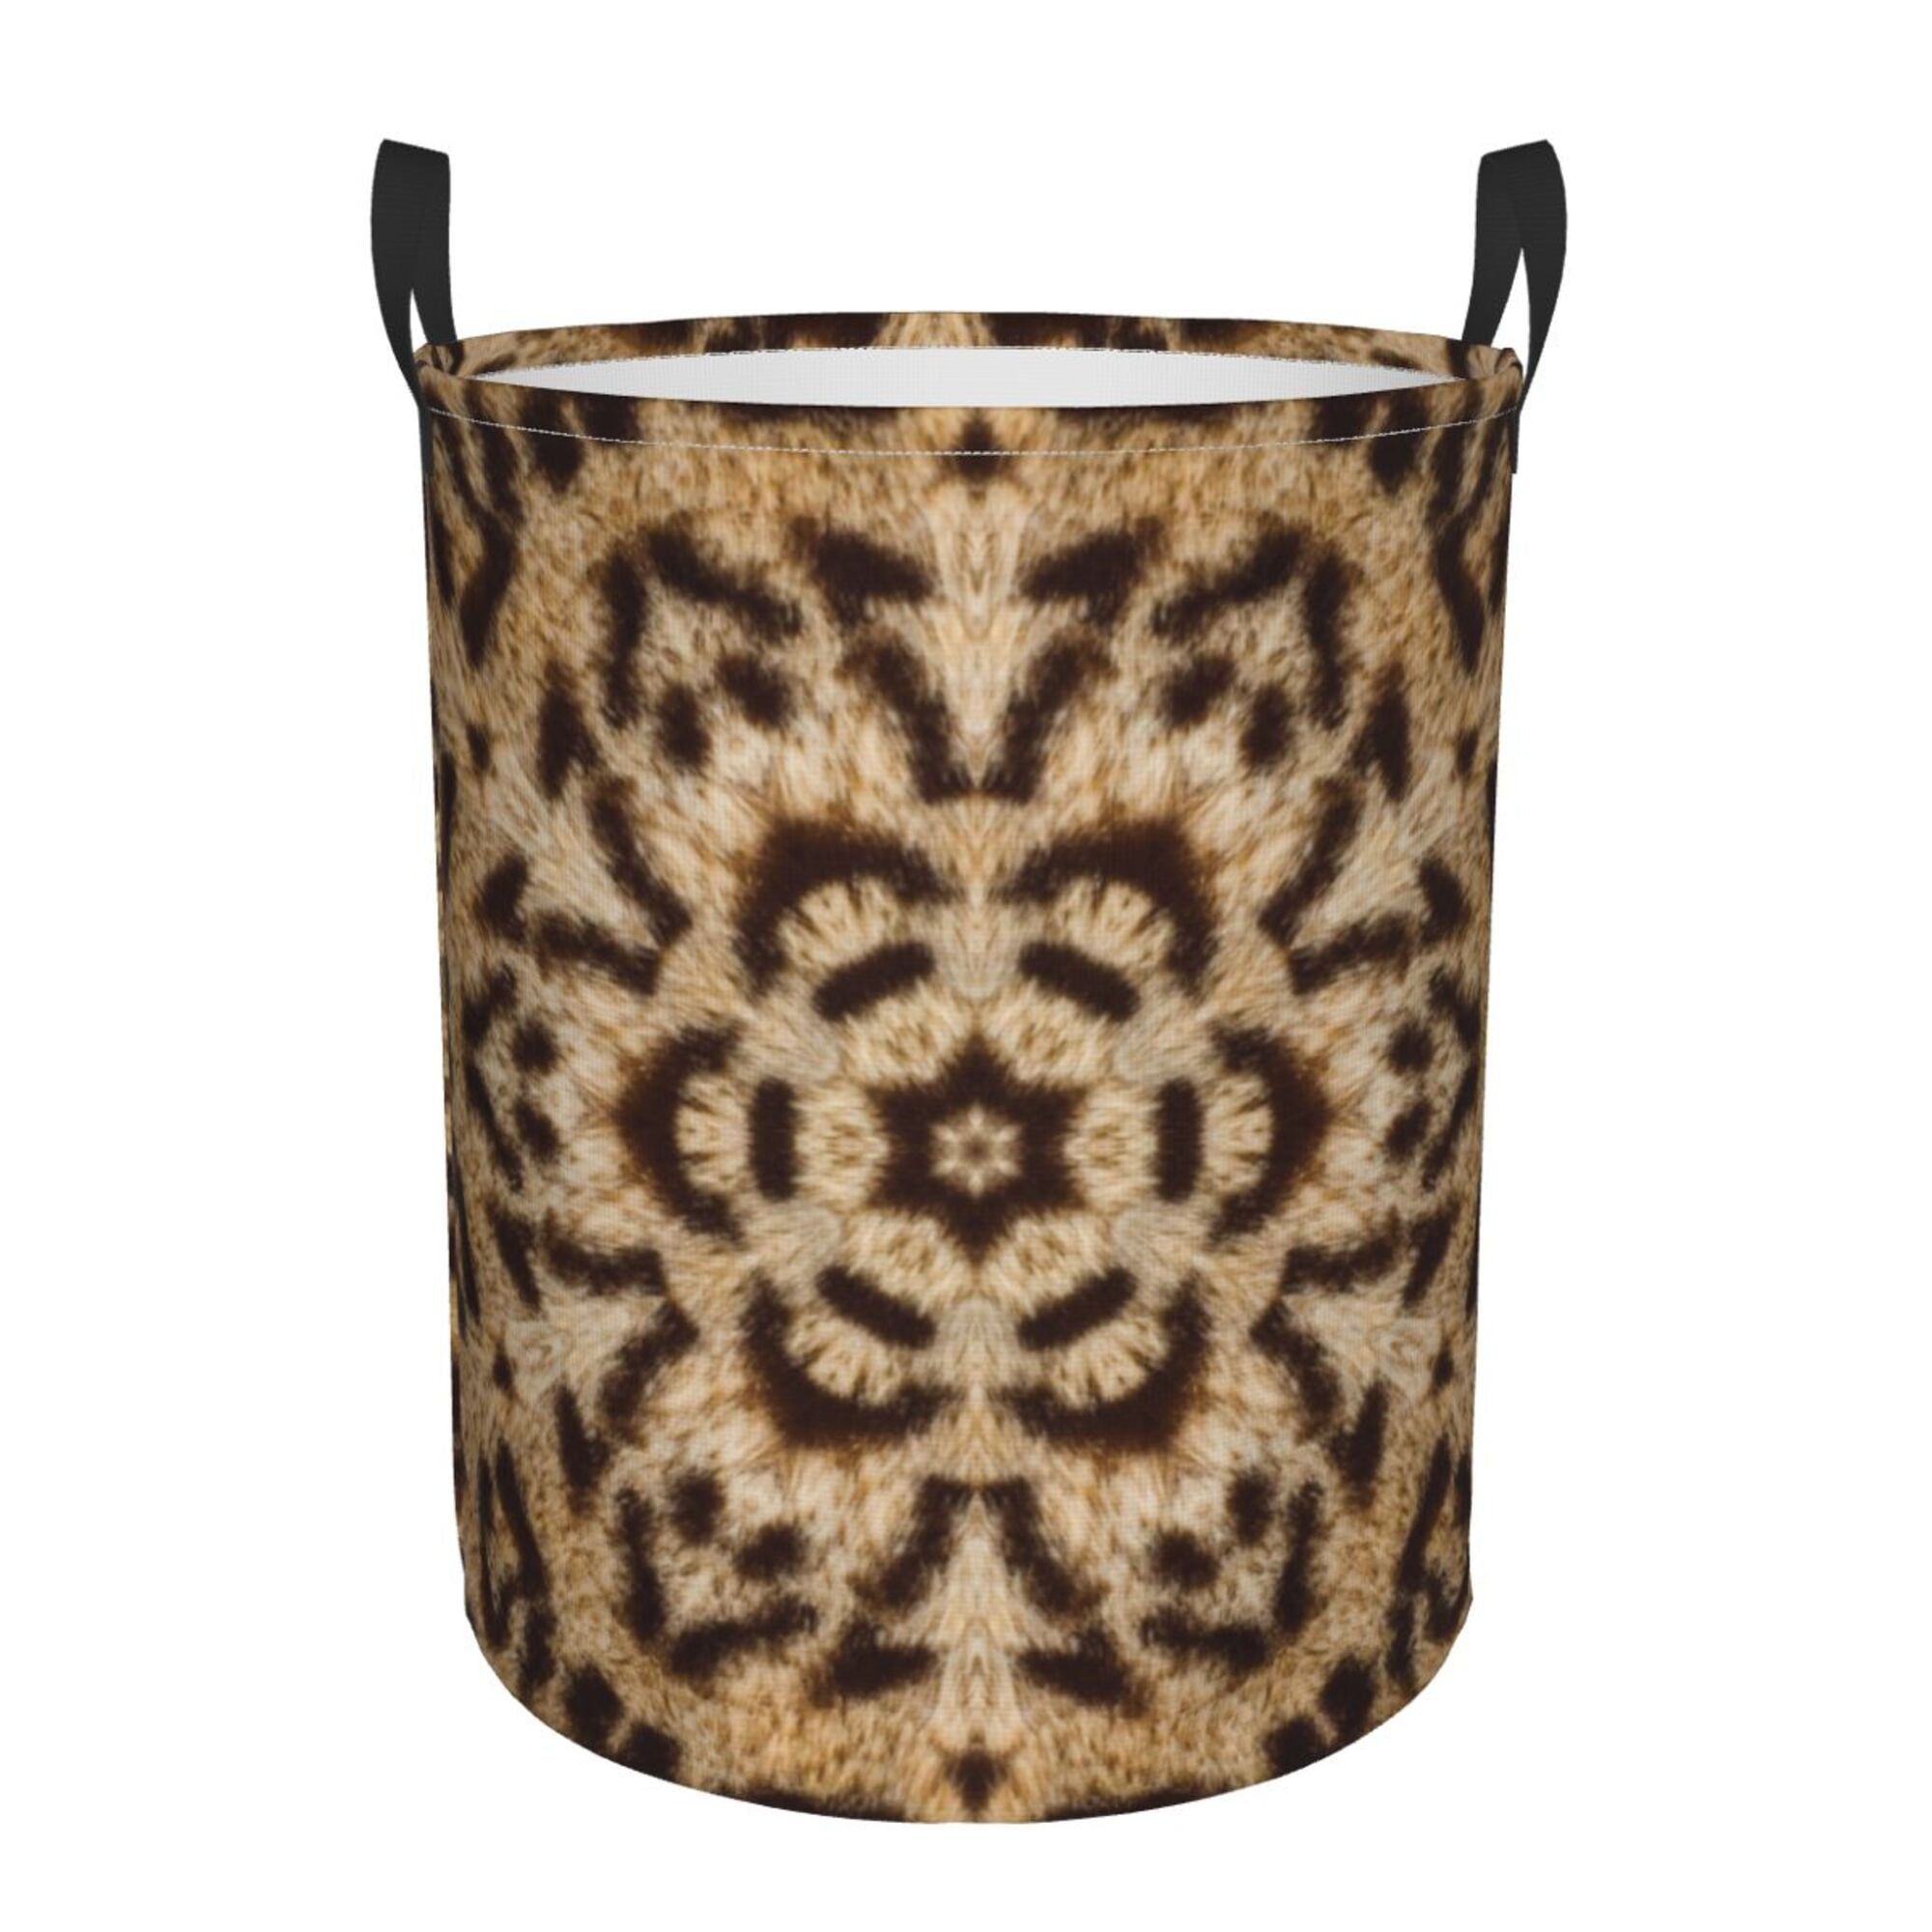 Leopard Animal Laundry Basket Organizer Collapsible, Bathroom Dirty ...